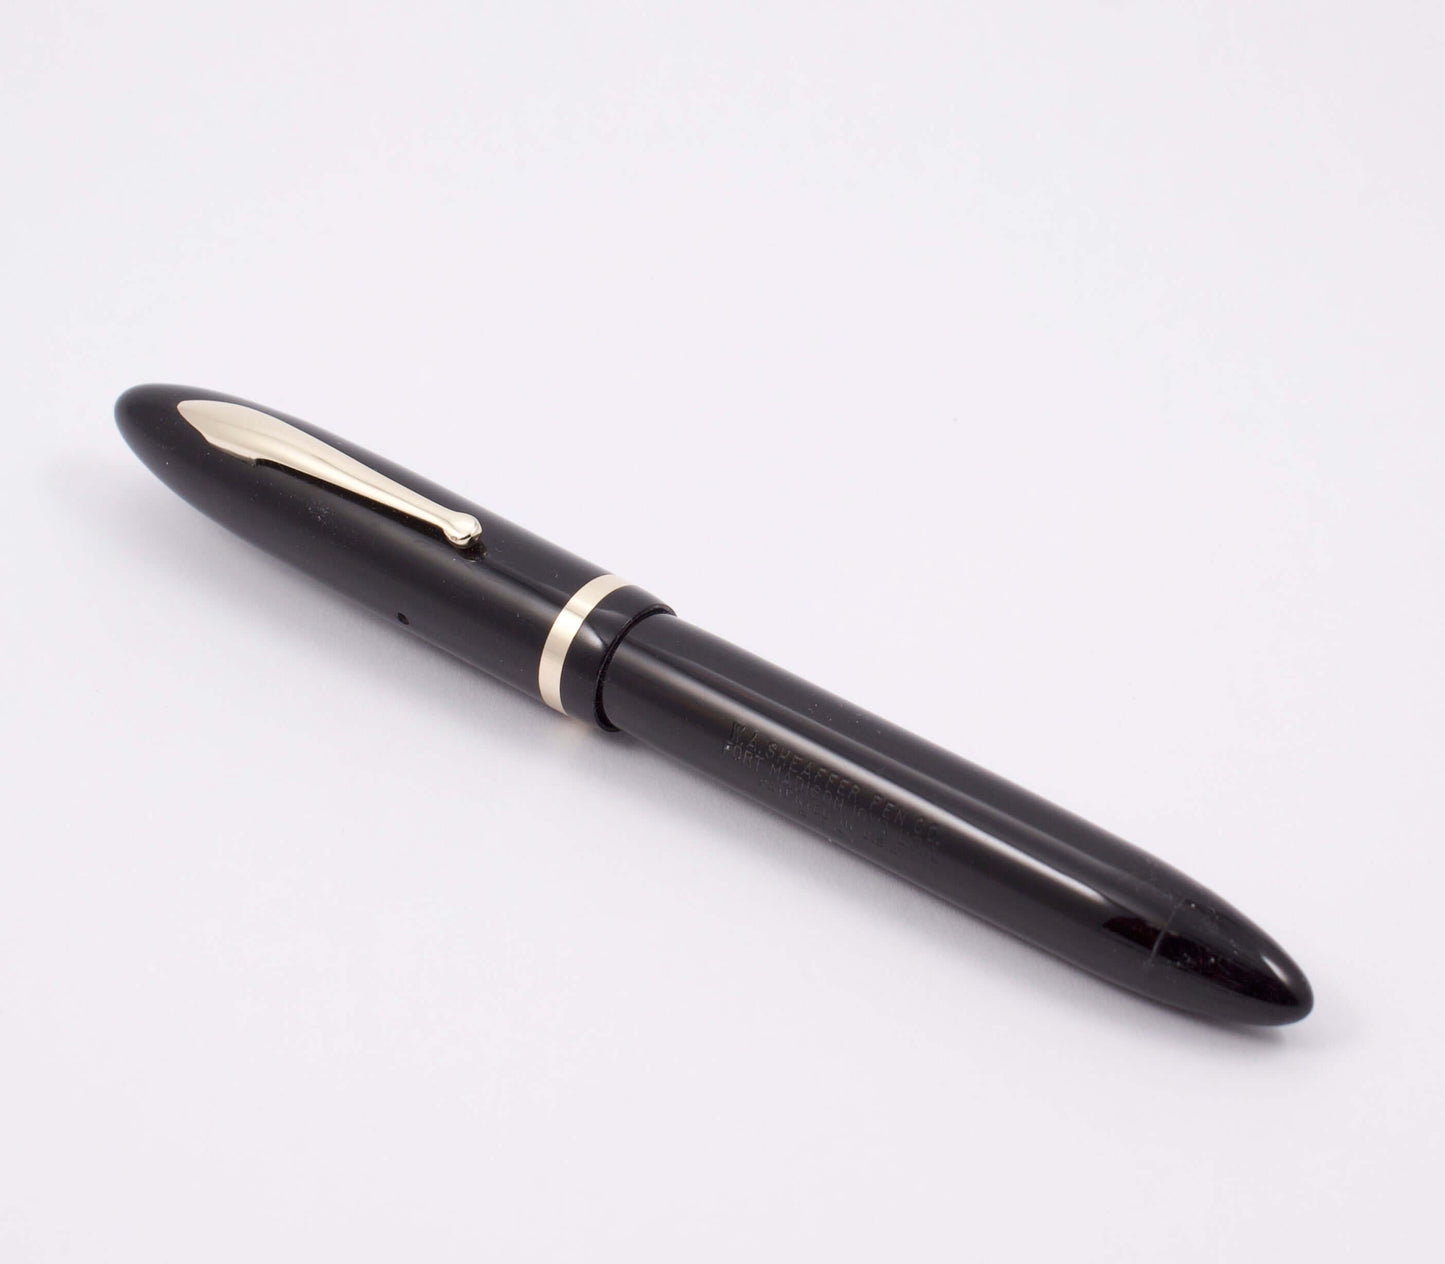 Sheaffer Balance Fountain Pen, Jet Black, Vac-fil, Black, non white dot. Fine number 5 Feather Touch Nib. Product Name: Sheaffer Vac-Fil Balance Fountain Pen Manufacture Year: 1940's Length: 5 1/4 Filling System: Vac-Fil, has been restored and has a new s